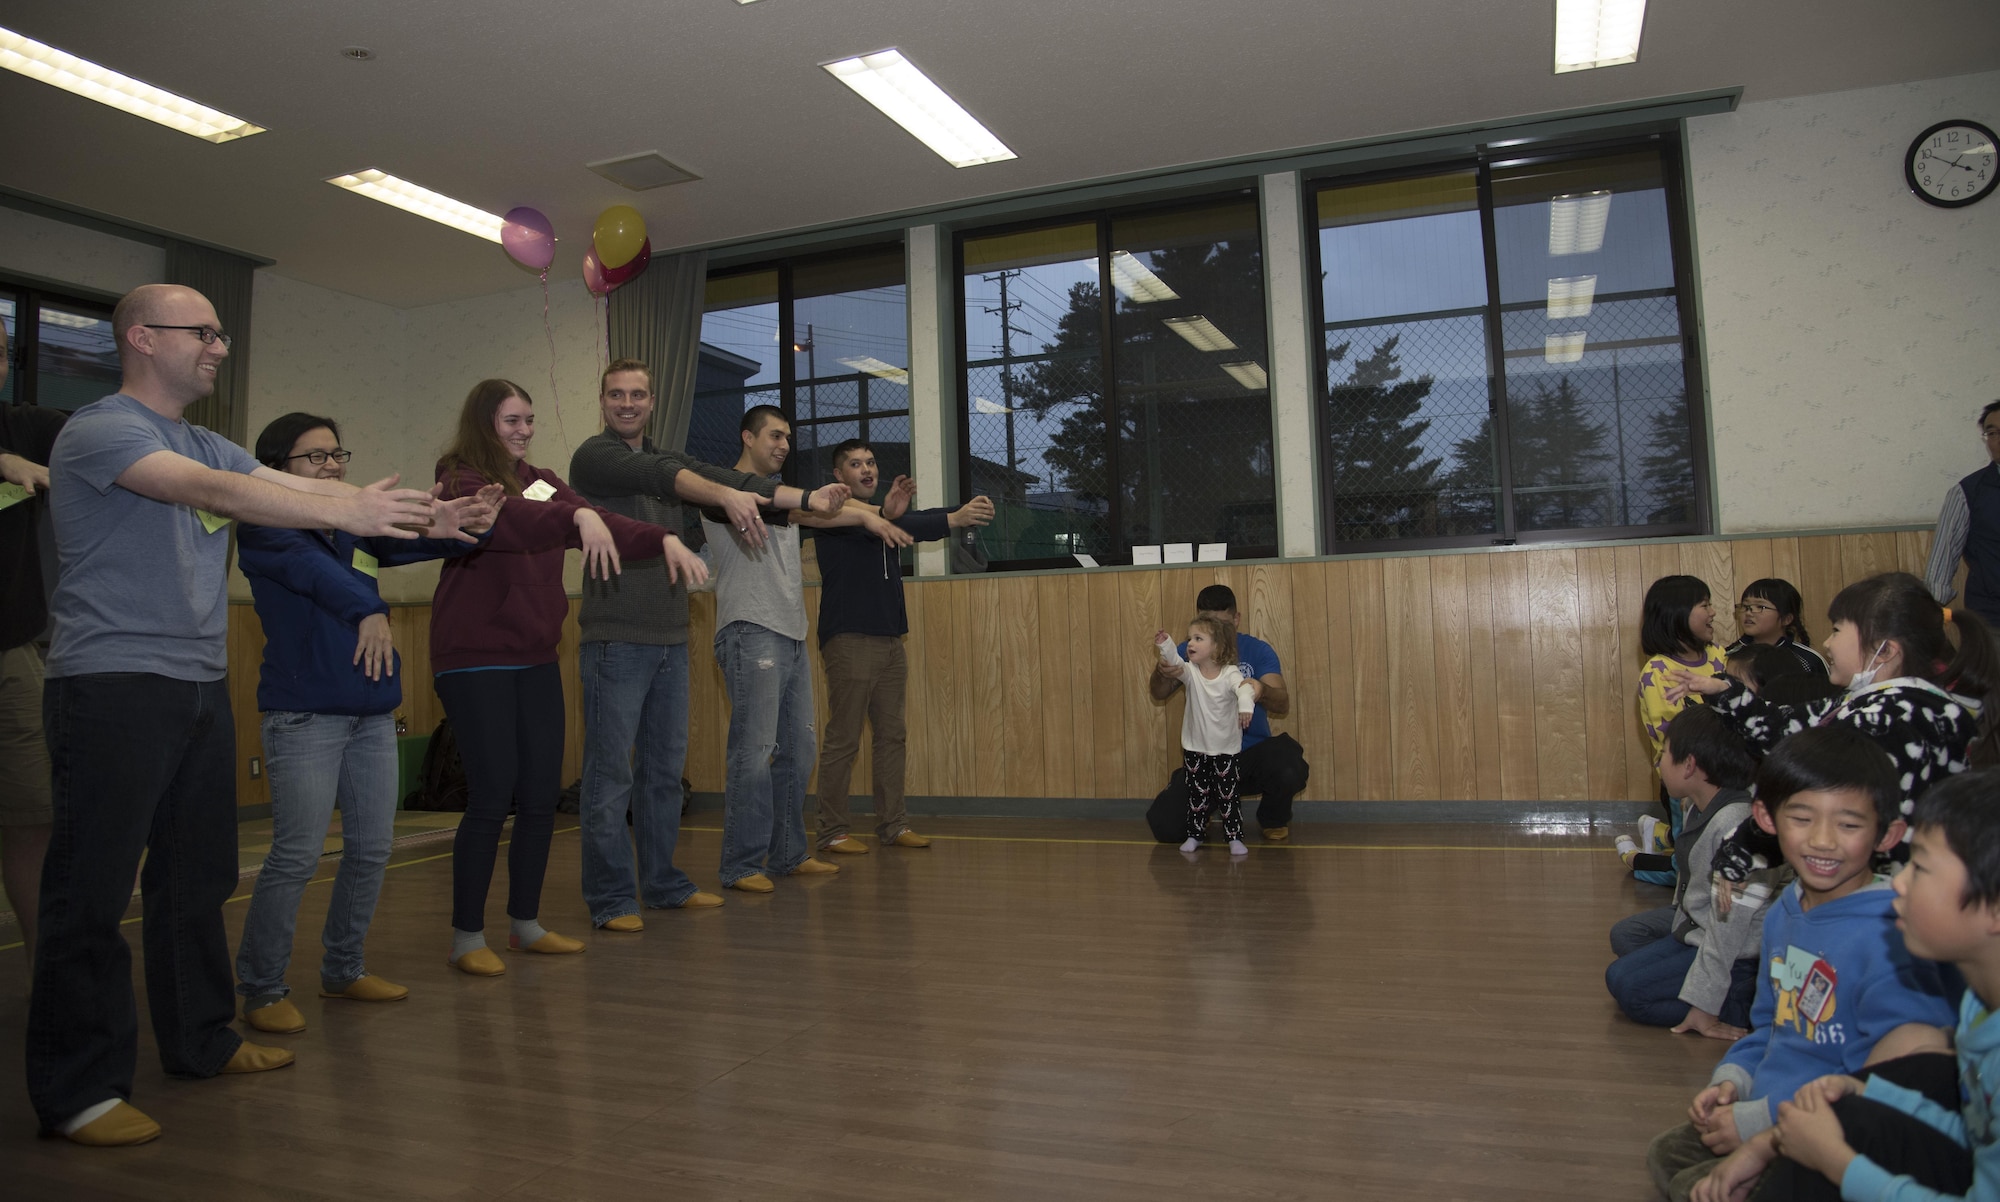 Airmen with the 35th Fighter Wing teach grade schoolers the "Hokey-Pokey" at Okamisawa Grade School, Misawa City, Japan, Nov. 22, 2016. The program, Jido-kan, is a mentorship program headed by the 35th Civil Engineer Squadron used to give back to Japan and foster good relations within the local community. (U.S. Air Force photo by Airman 1st Class Sadie Colbert)